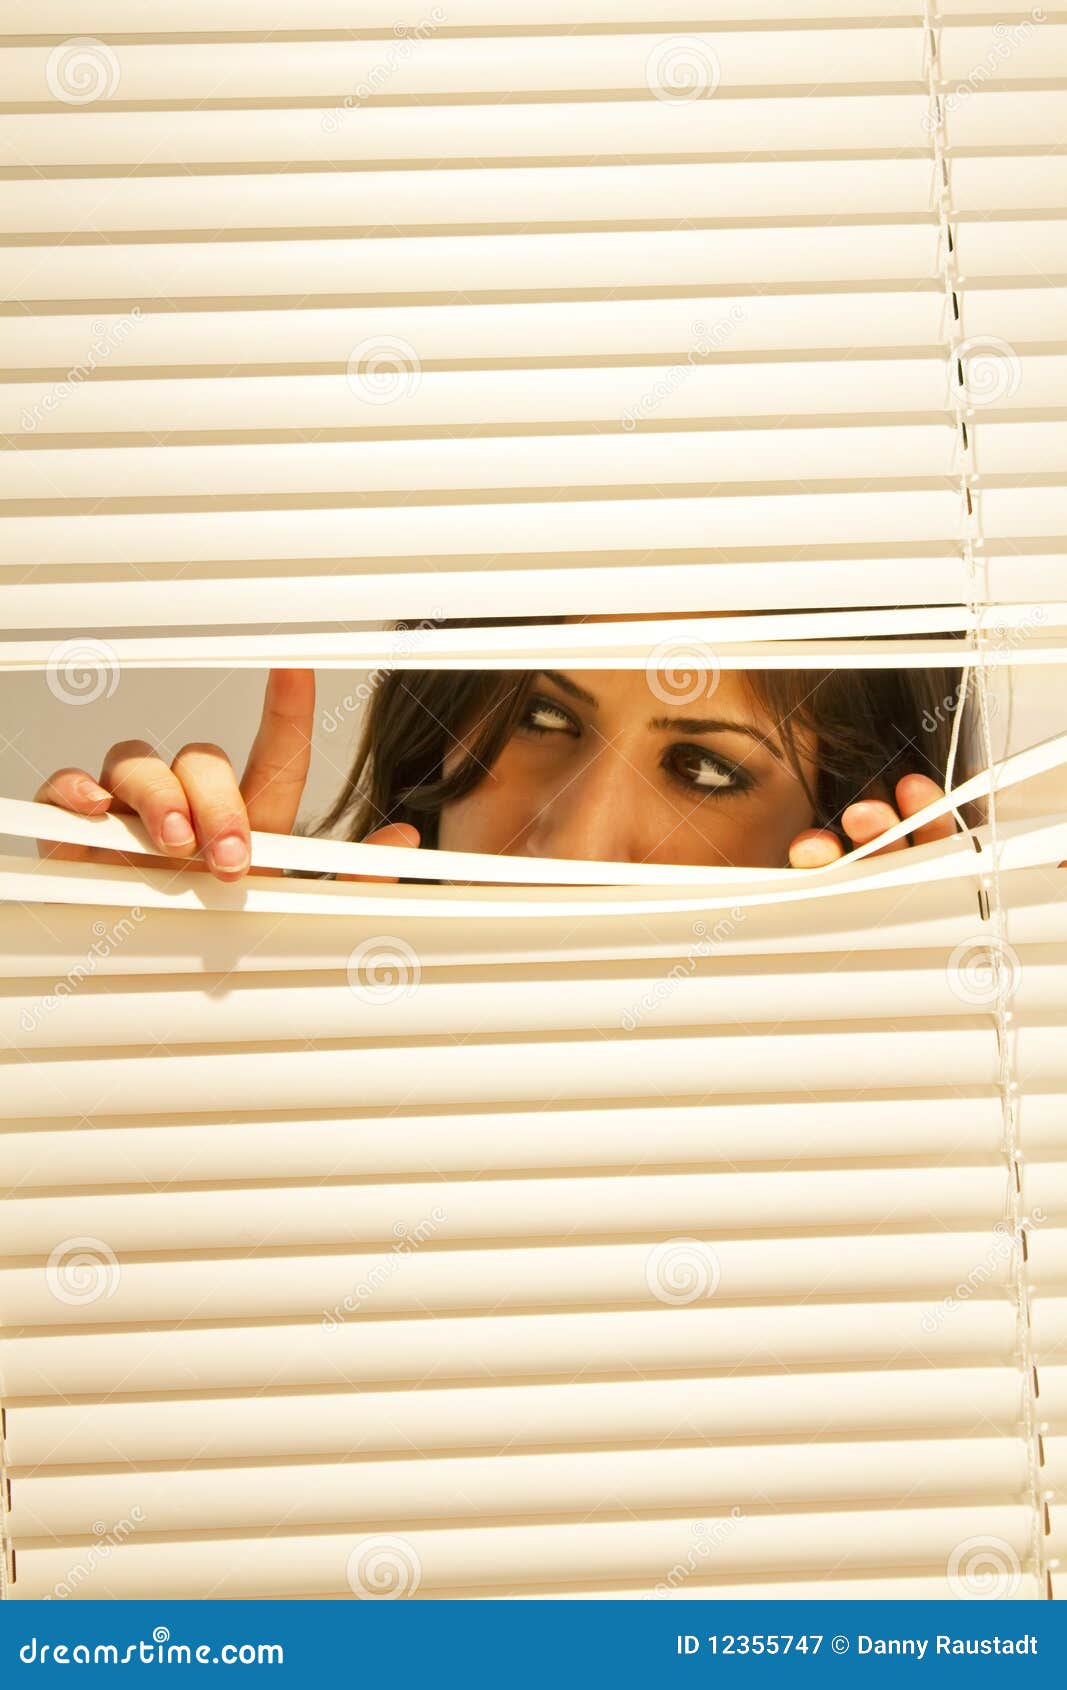 young brunette woman looking through window blinds